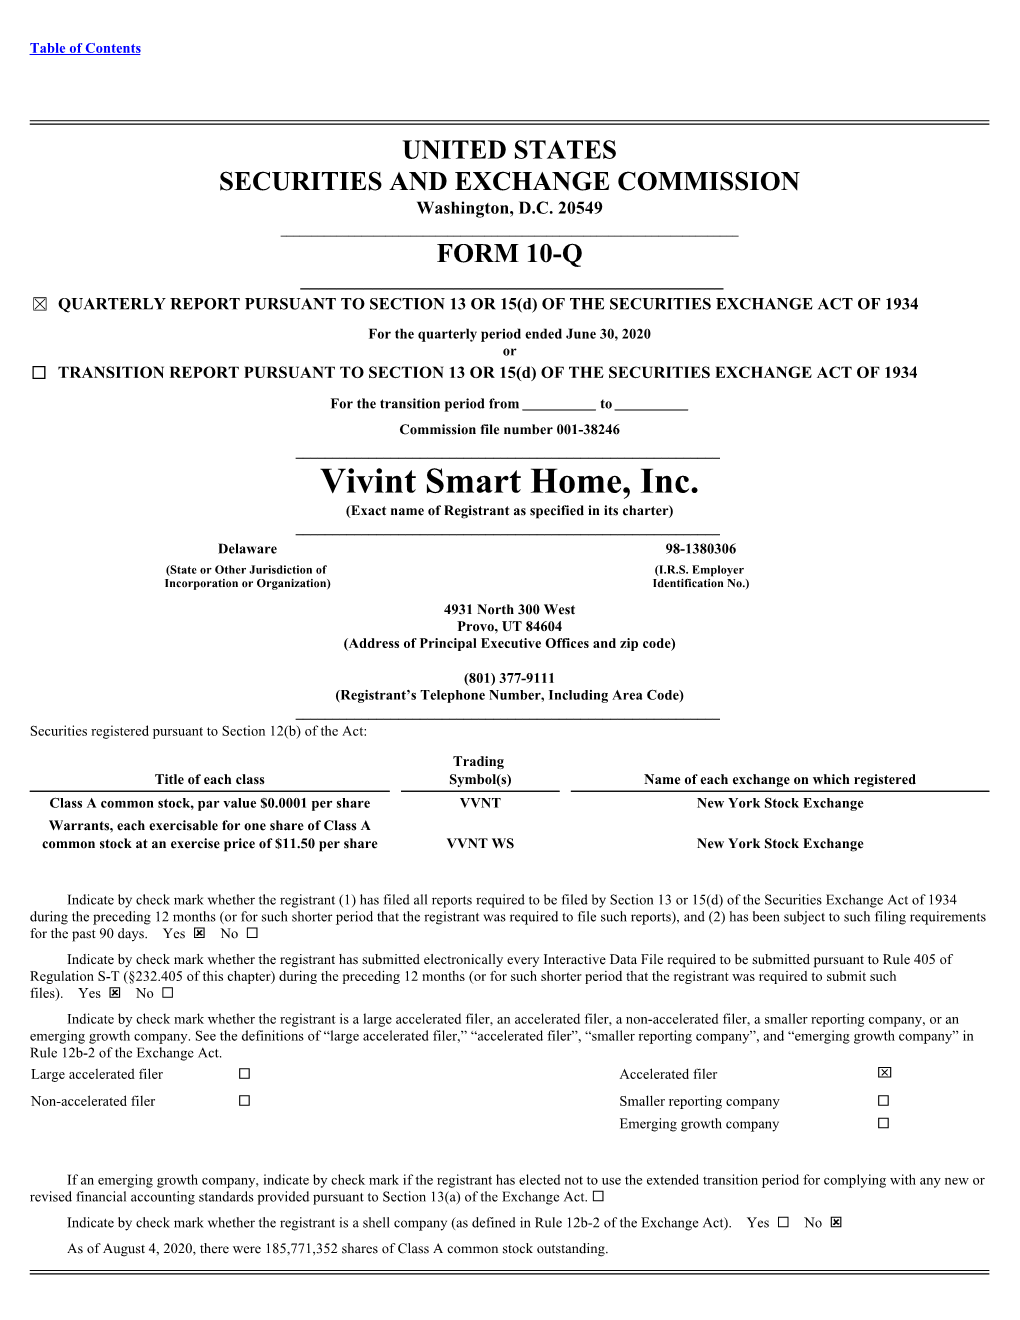 Vivint Smart Home, Inc. (Exact Name of Registrant As Specified in Its Charter) ______Delaware 98-1380306 (State Or Other Jurisdiction of (I.R.S